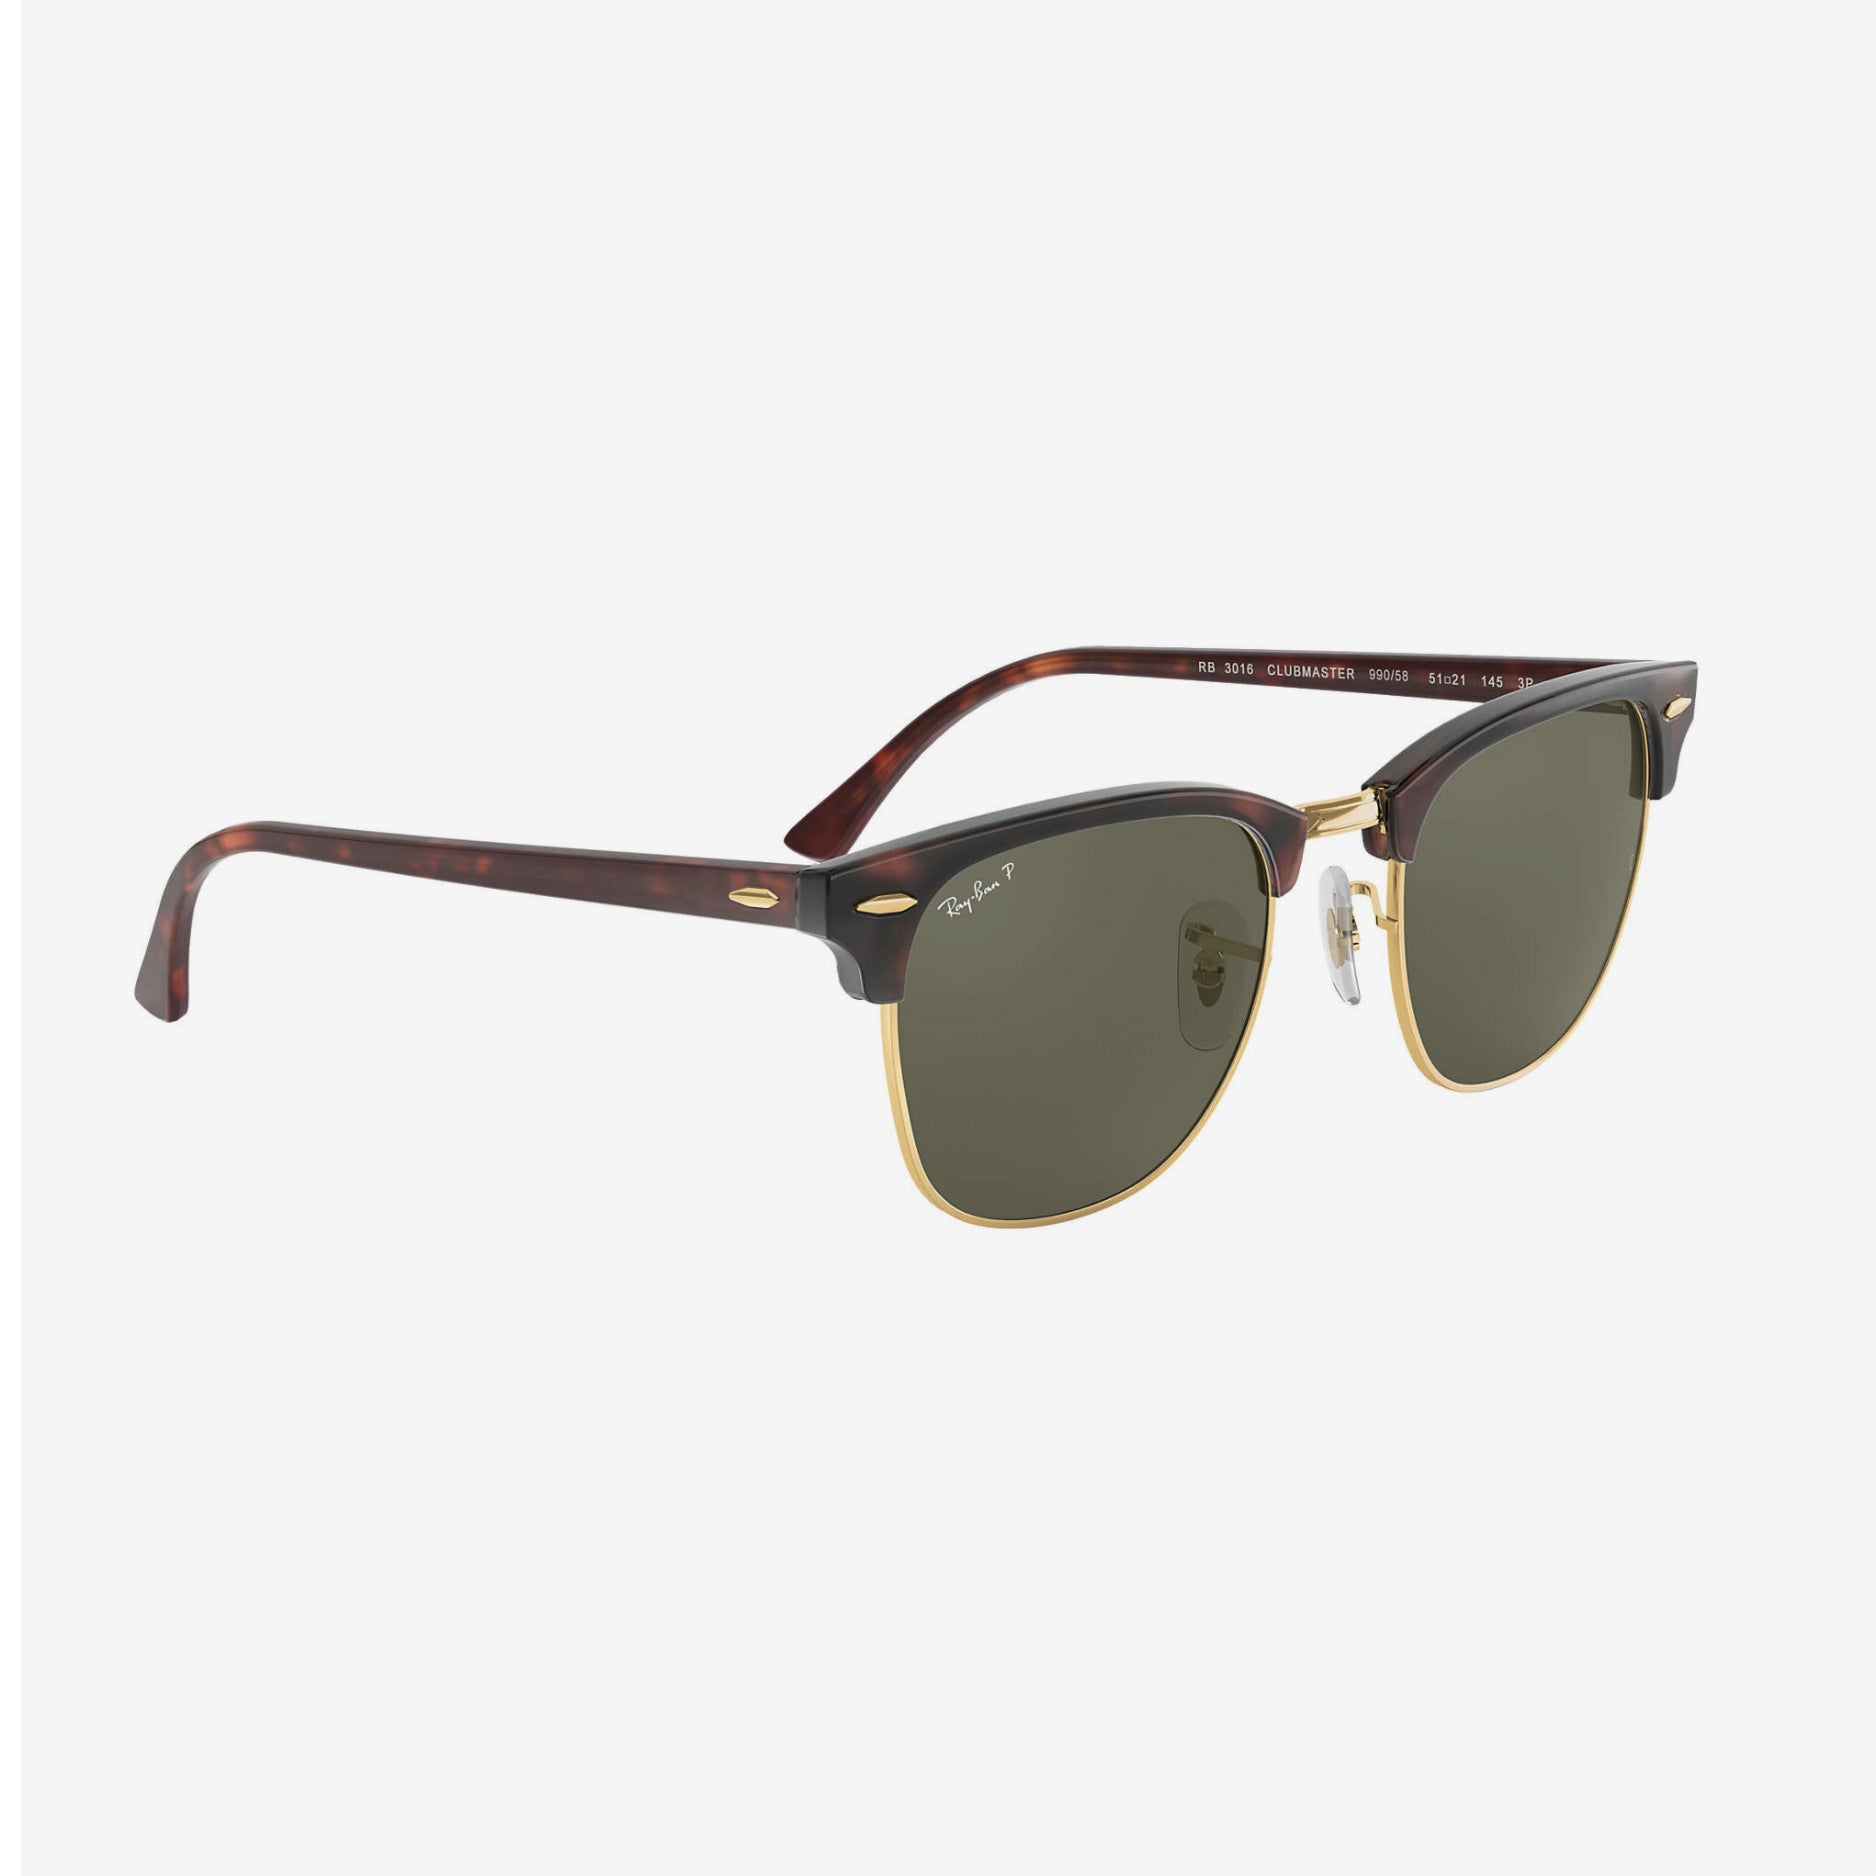 cheap clubmaster glasses